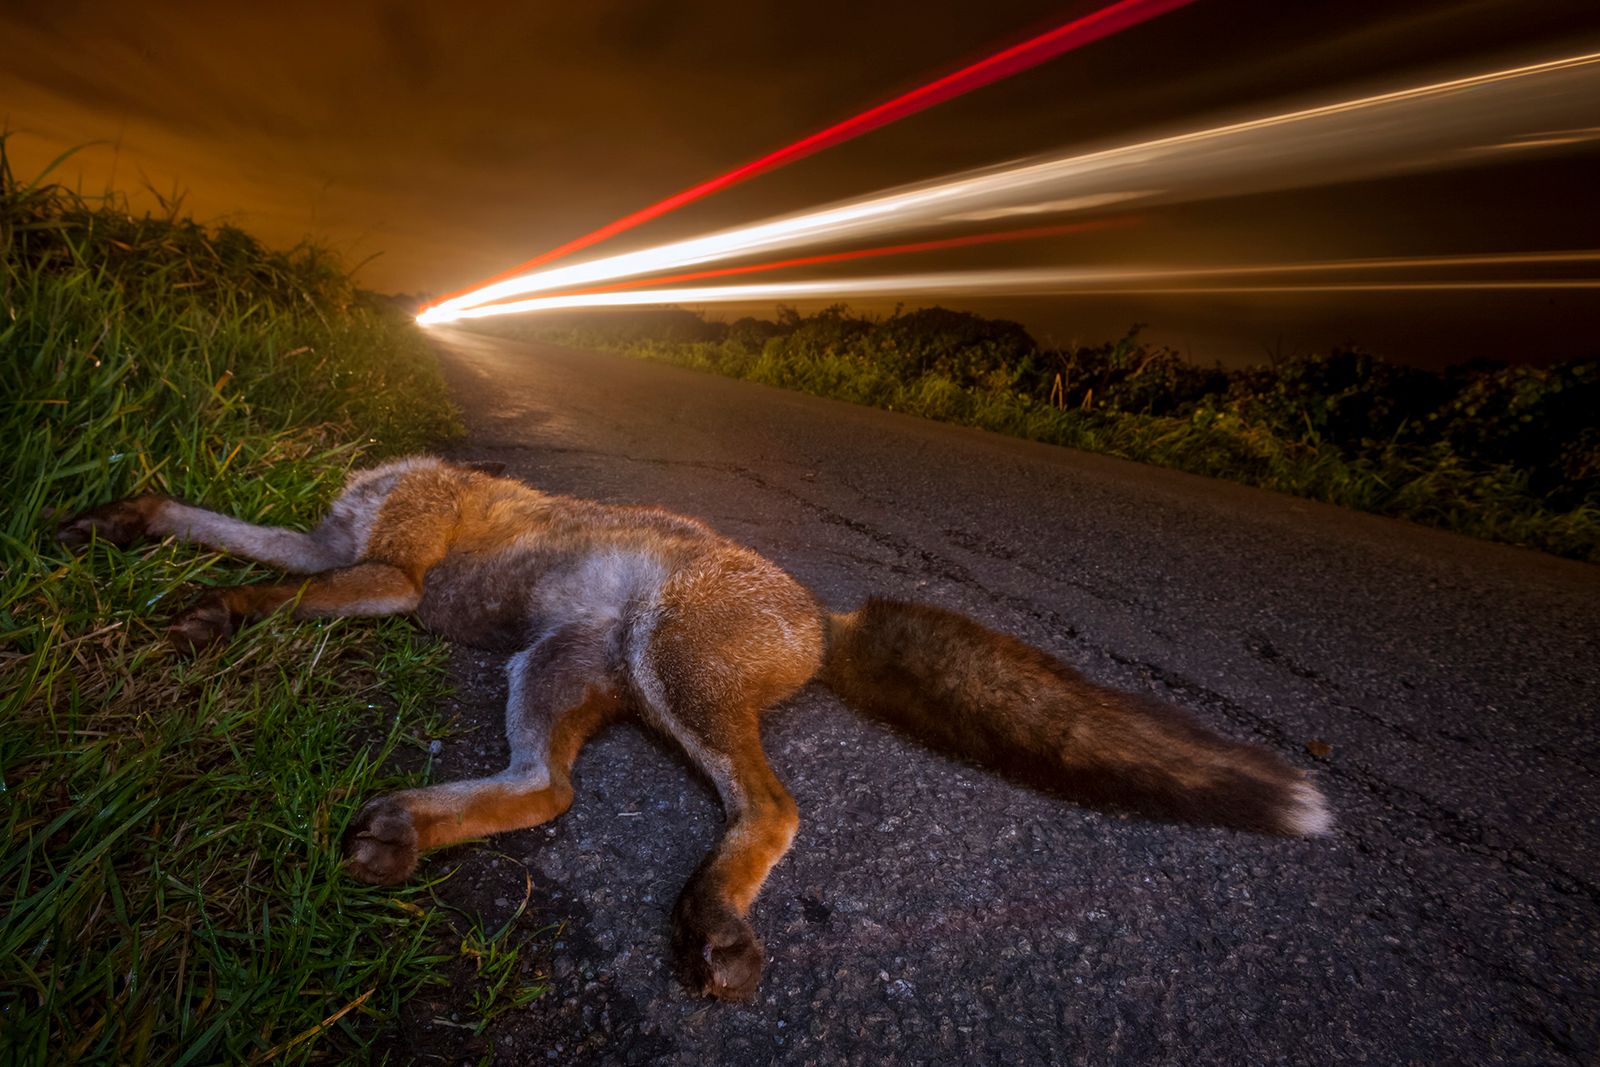 © Neil Aldridge - Image from the Living with Foxes photography project